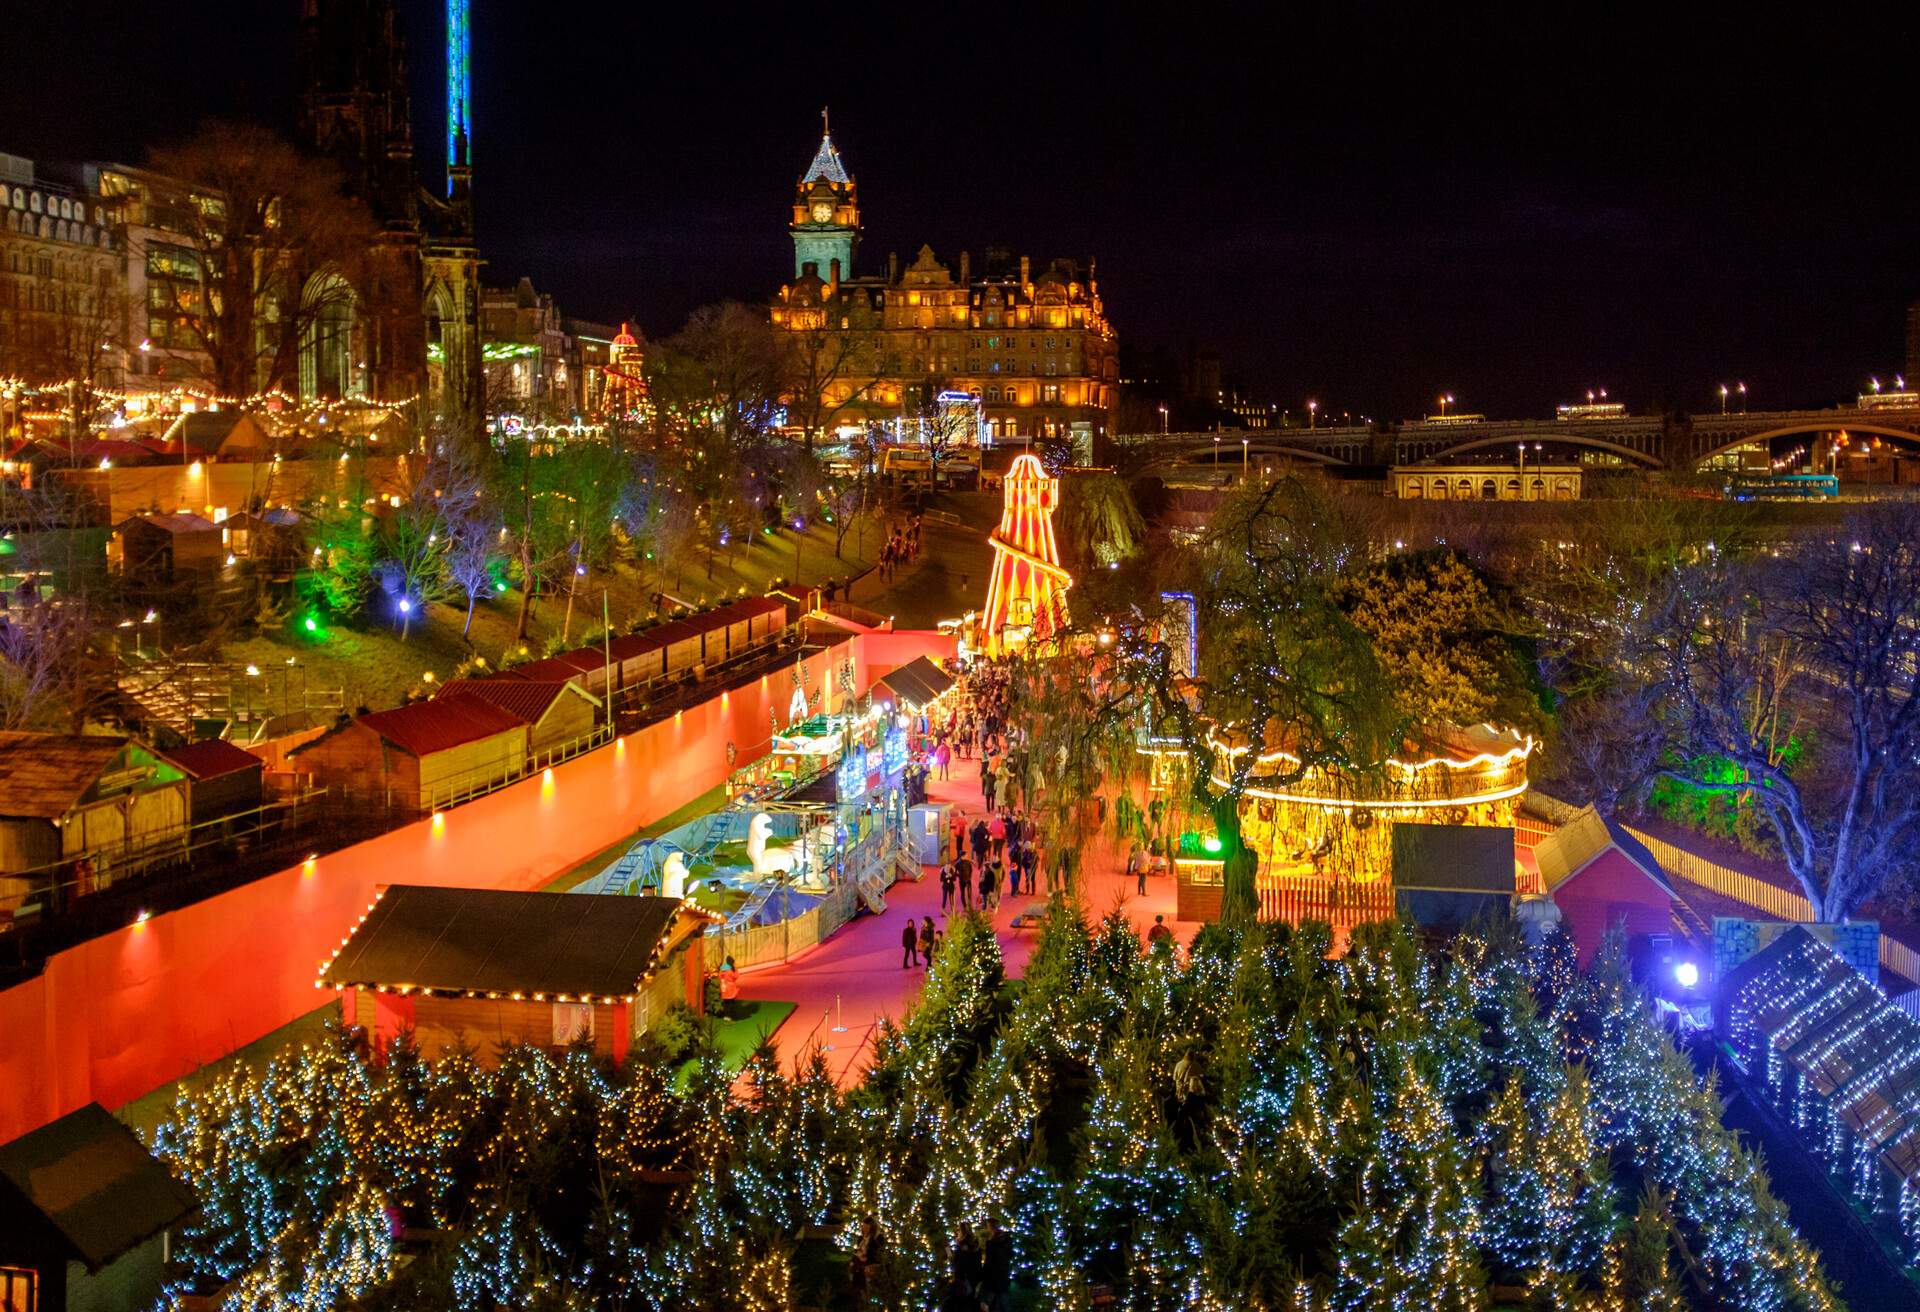 Scotland, Edinburgh, Princes Street Christmas Market. A traditional European Christmas Market located along Princes Street with the Scotts Monument and Balmoral Clock Tower in view.